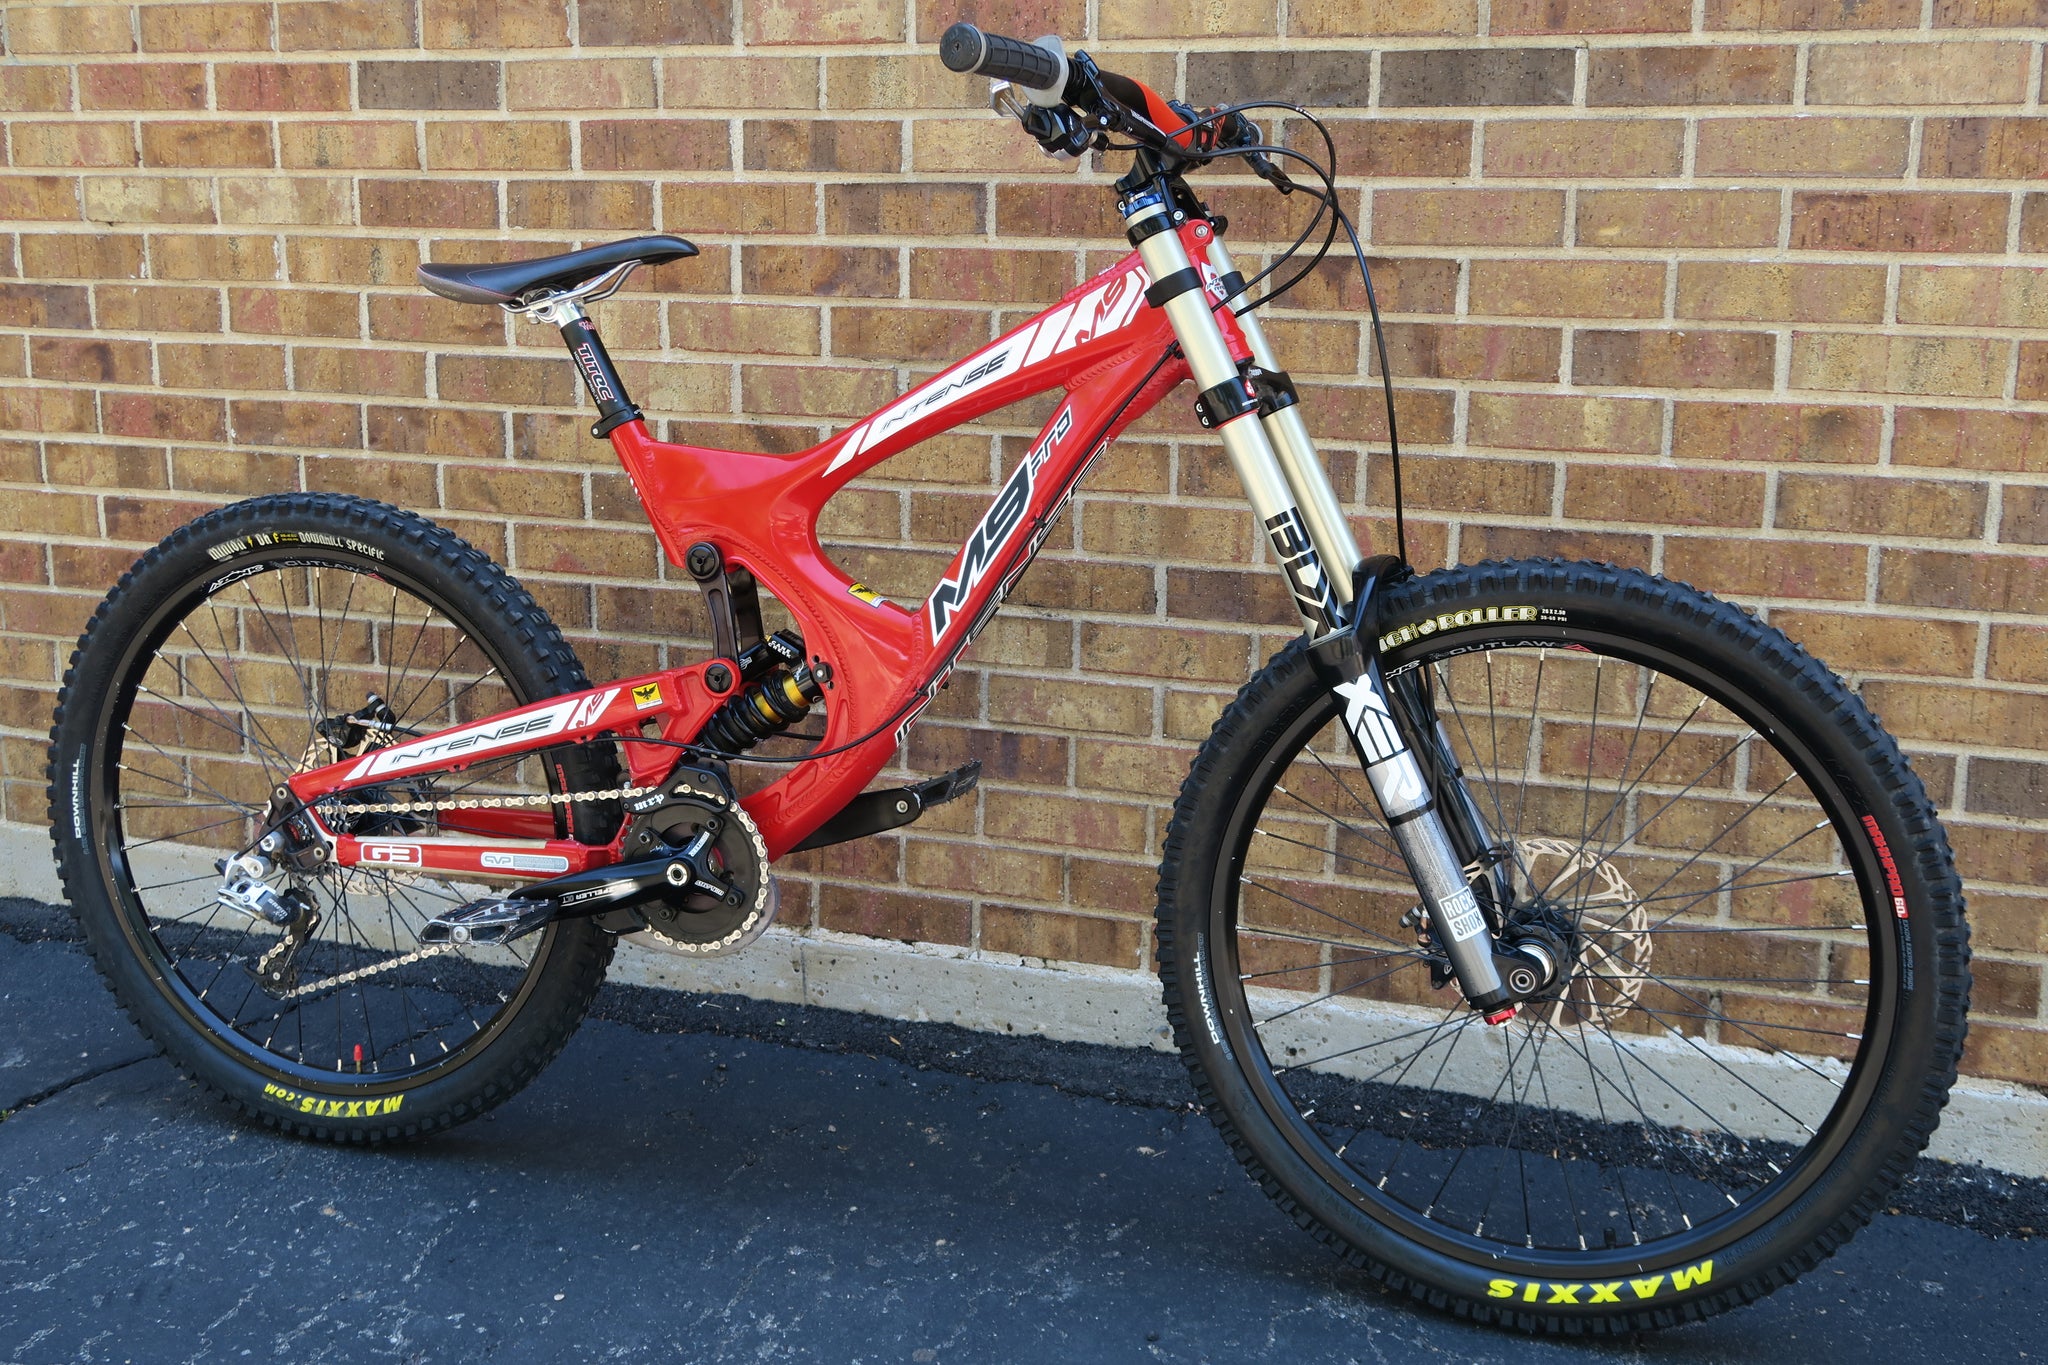 2012 INTENSE M9 FRO RED 26"